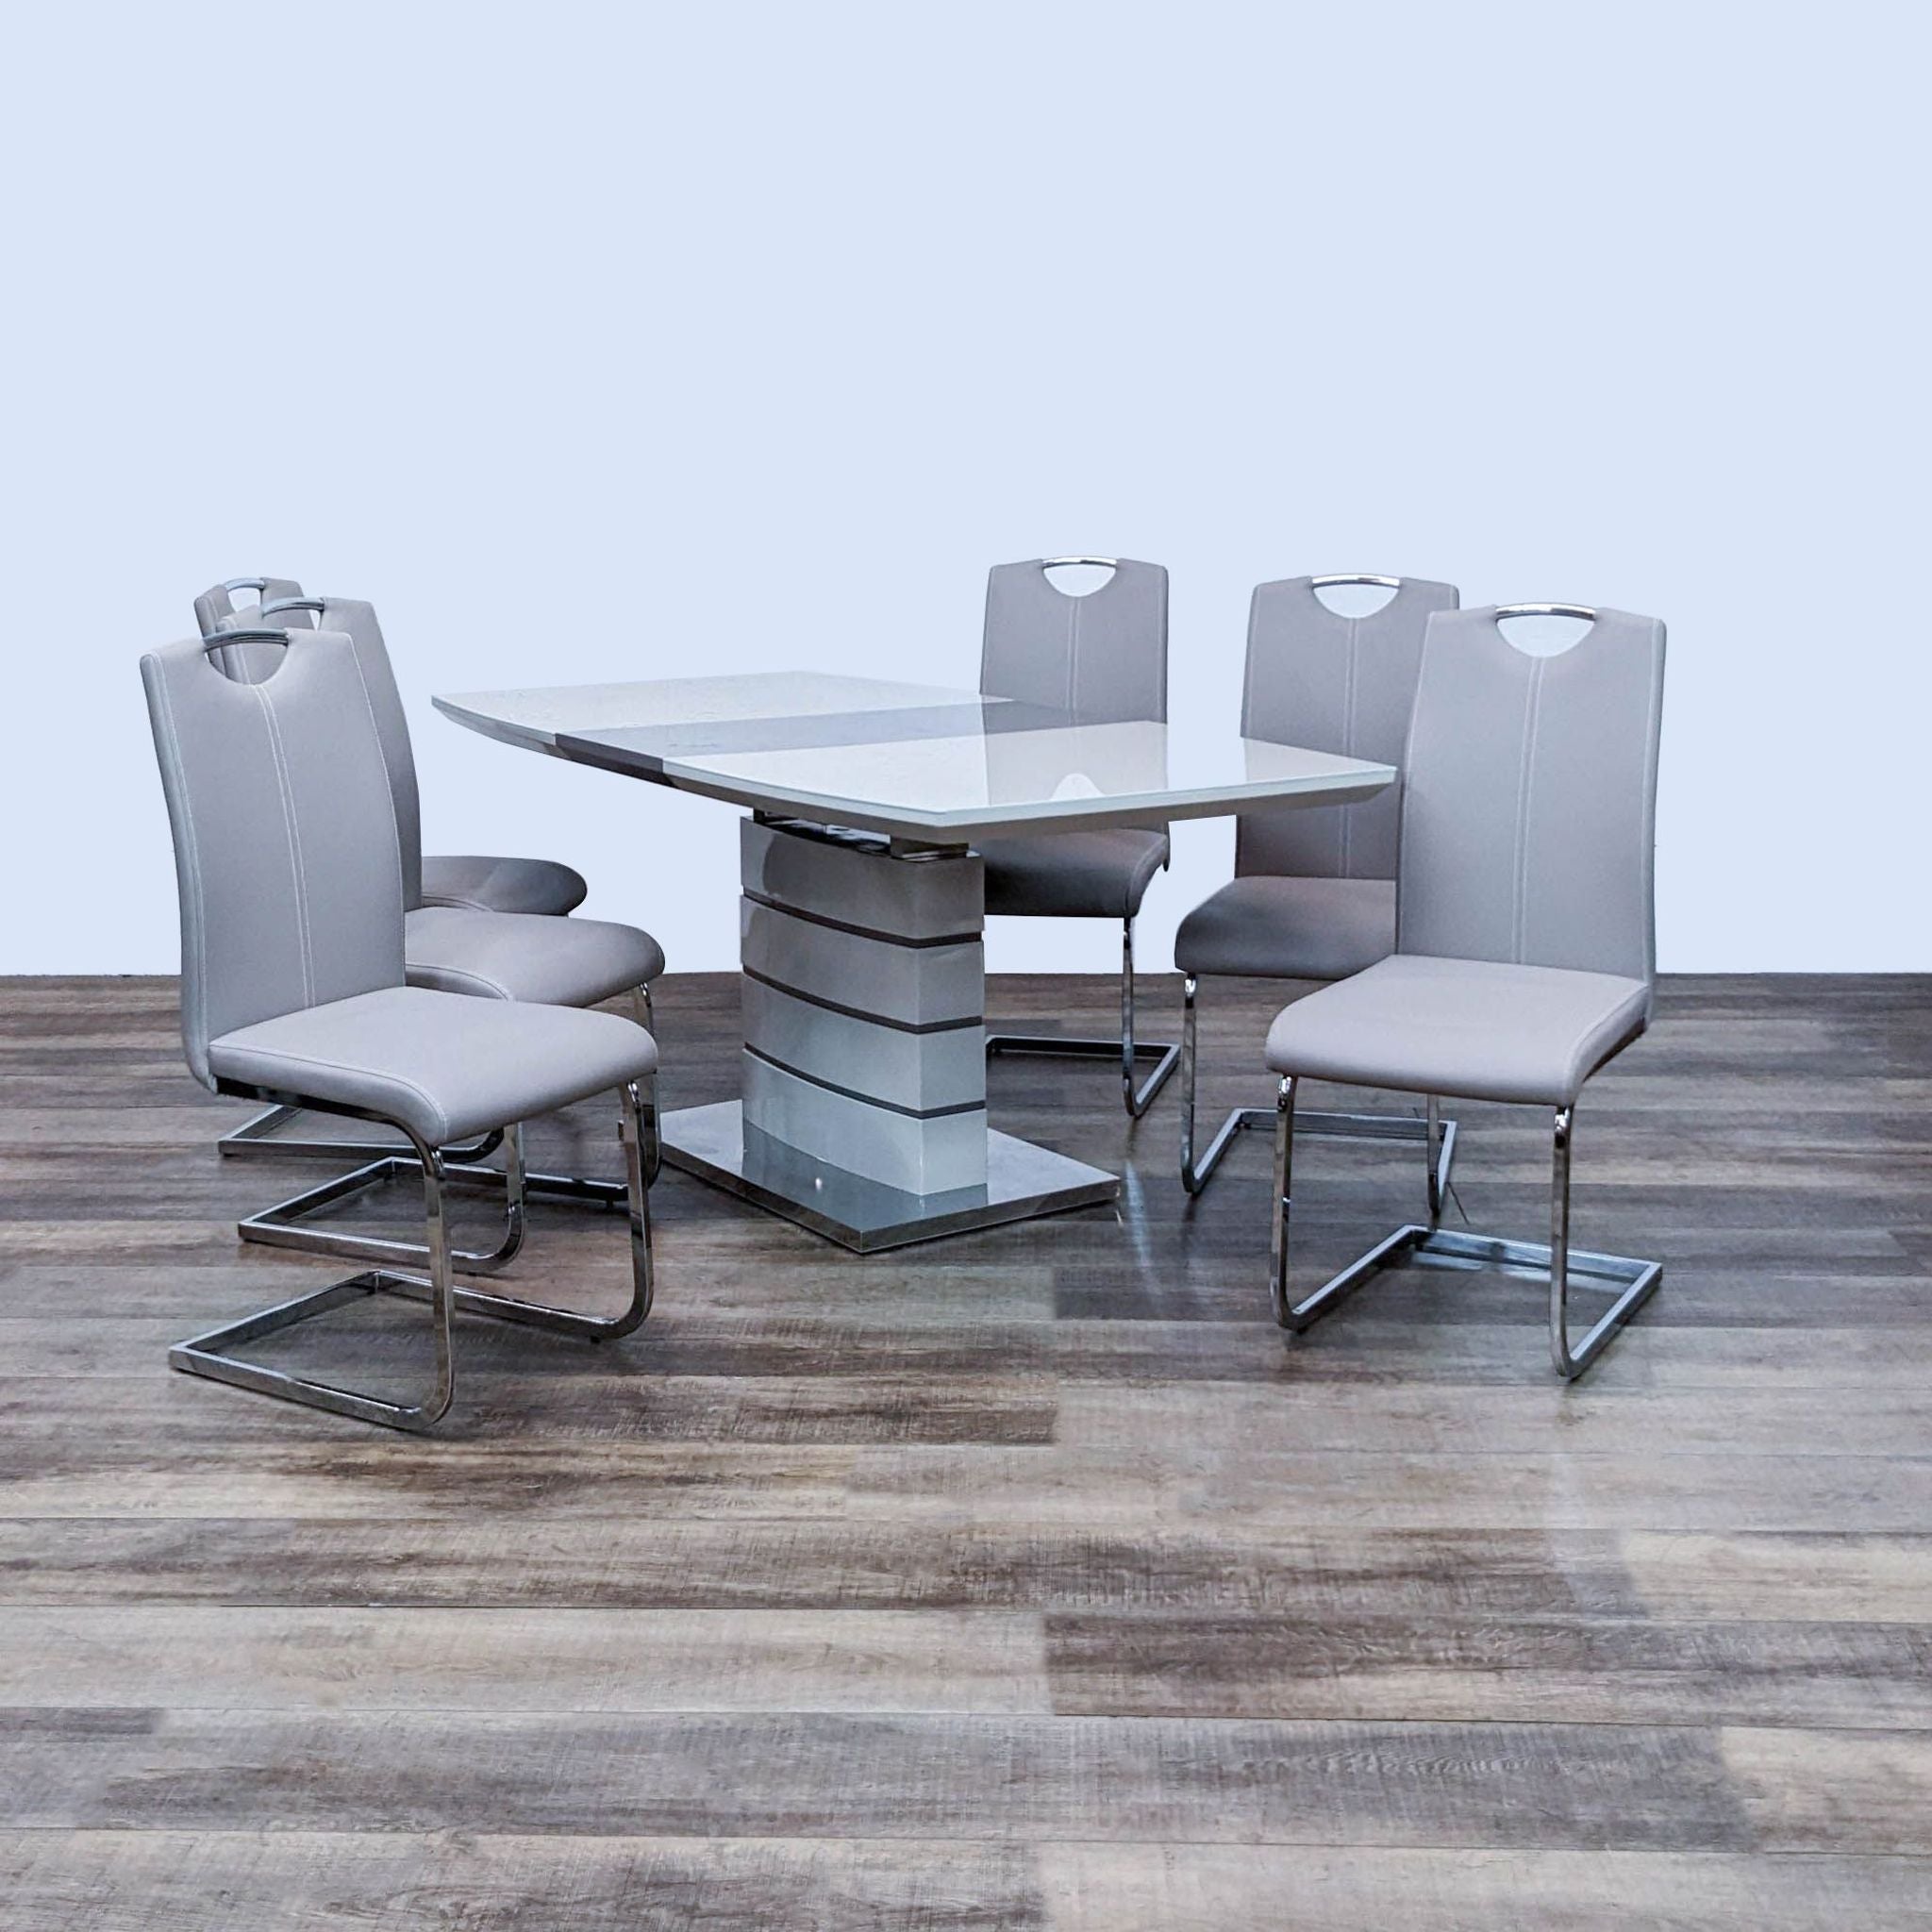 Alt text 1: A modern Reperch 7-piece dining set with high gloss white and gray-taupe table on a chrome base, accompanied by gray-taupe faux leather chairs.